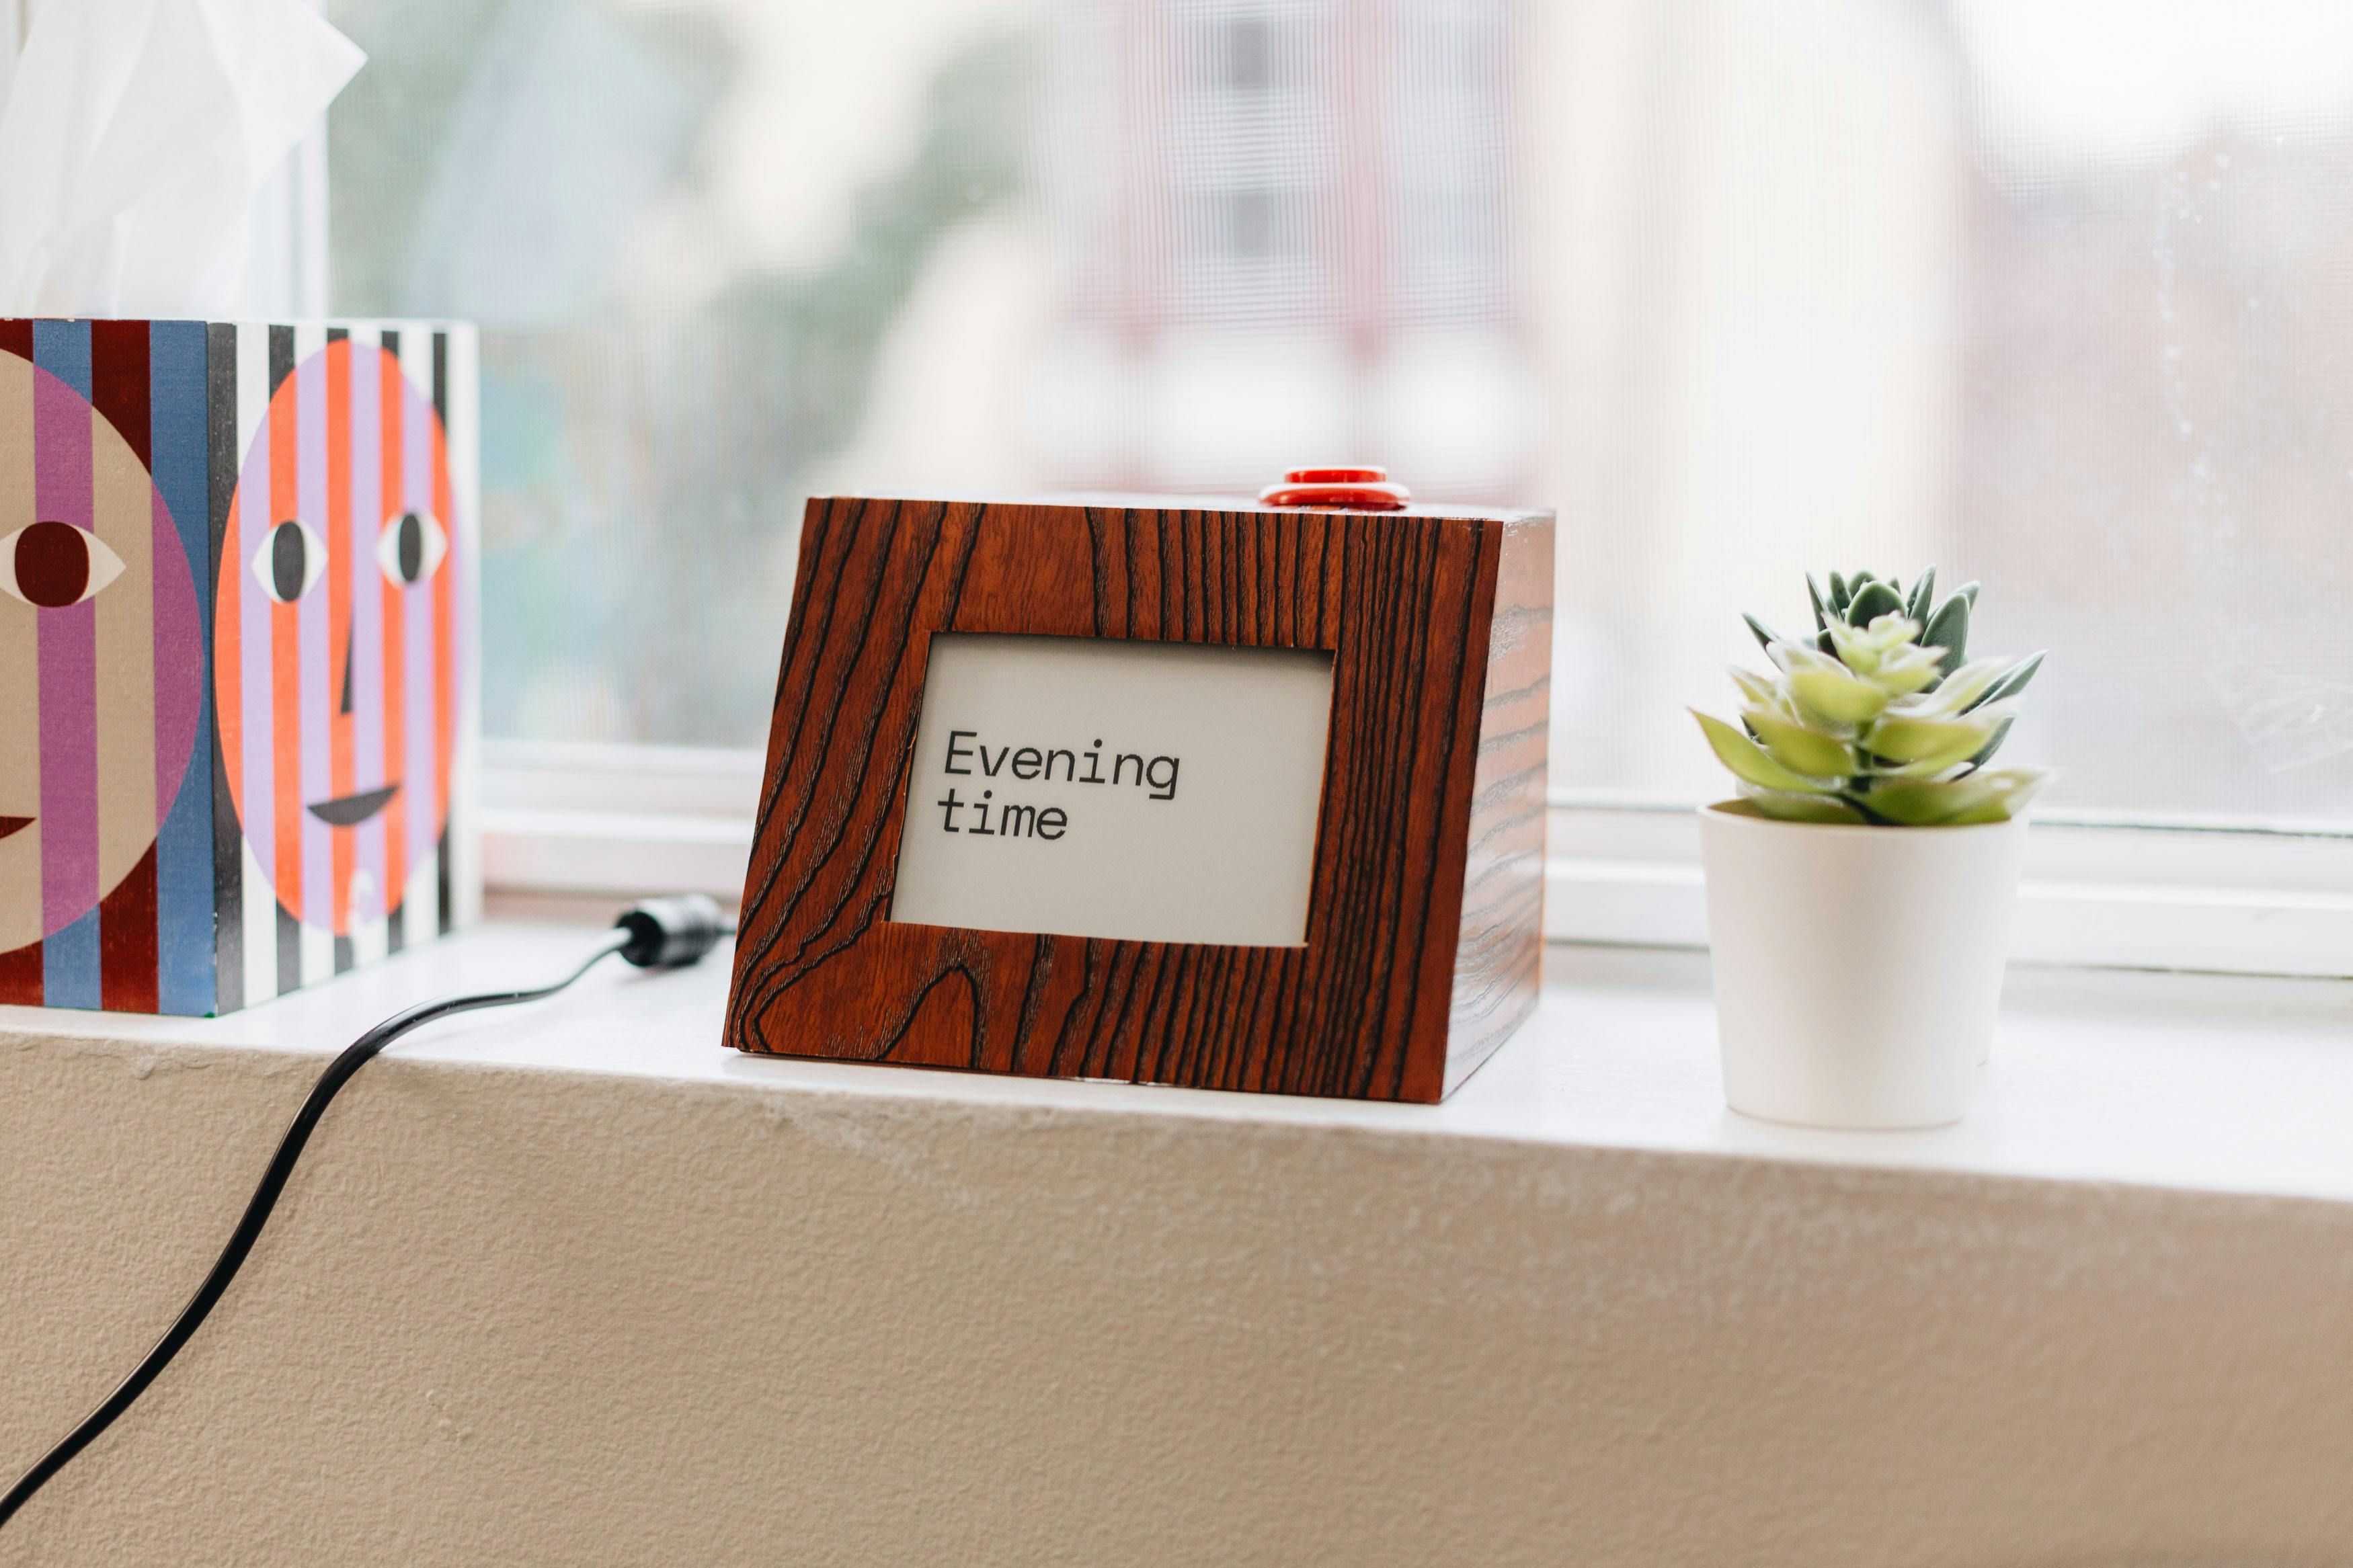 The fuzzy clock displaying "Evening Time